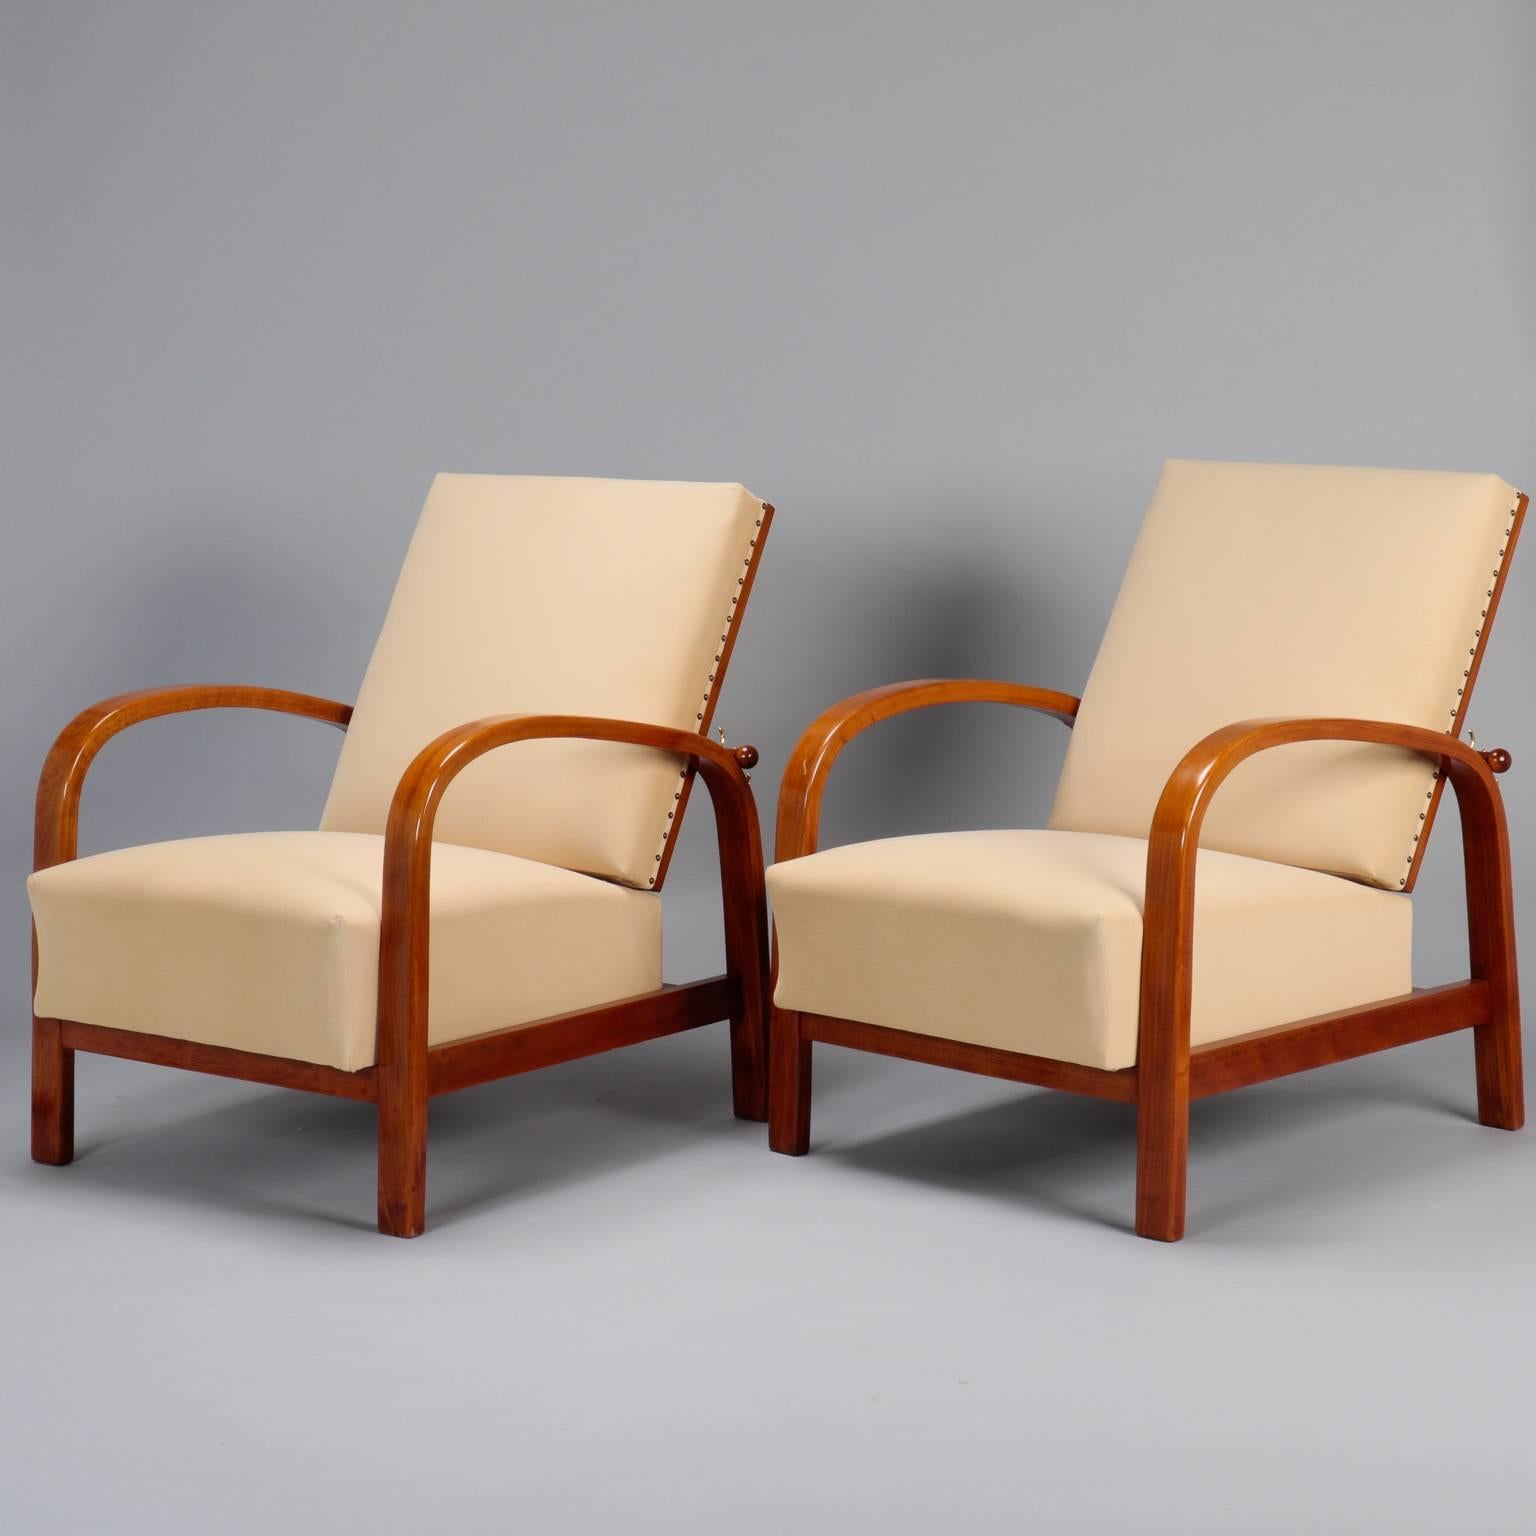 Palisander armchairs, circa 1940s found in France have dark polished wood frames with curved bentwood arms and angled seat backs. Newly upholstered in cream colored micro suede. Sold and priced as a pair.